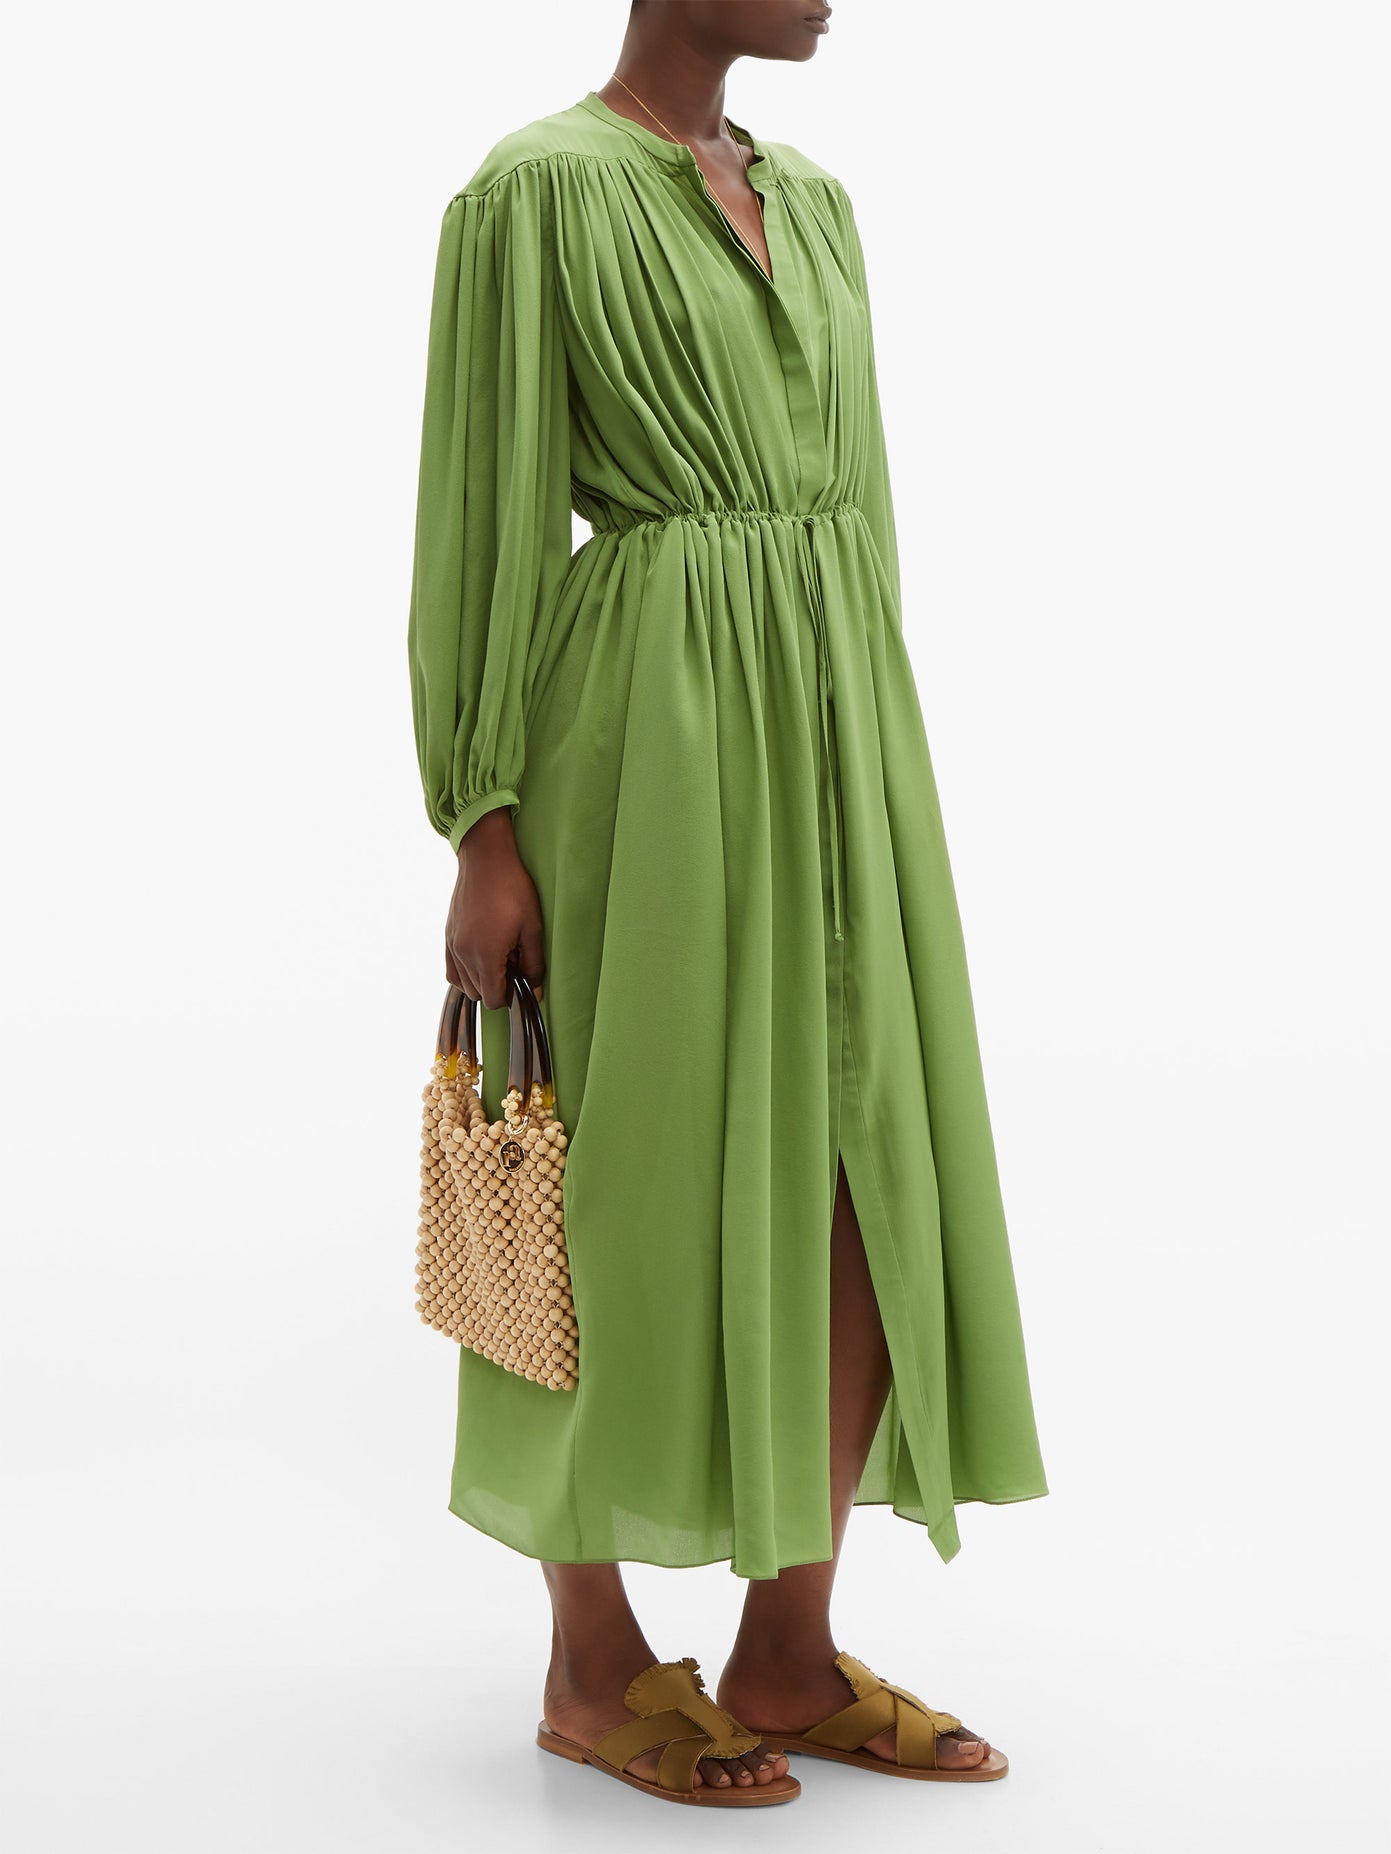 Three Graces London - Julienne Silk Shirtdress | ABOUT ICONS